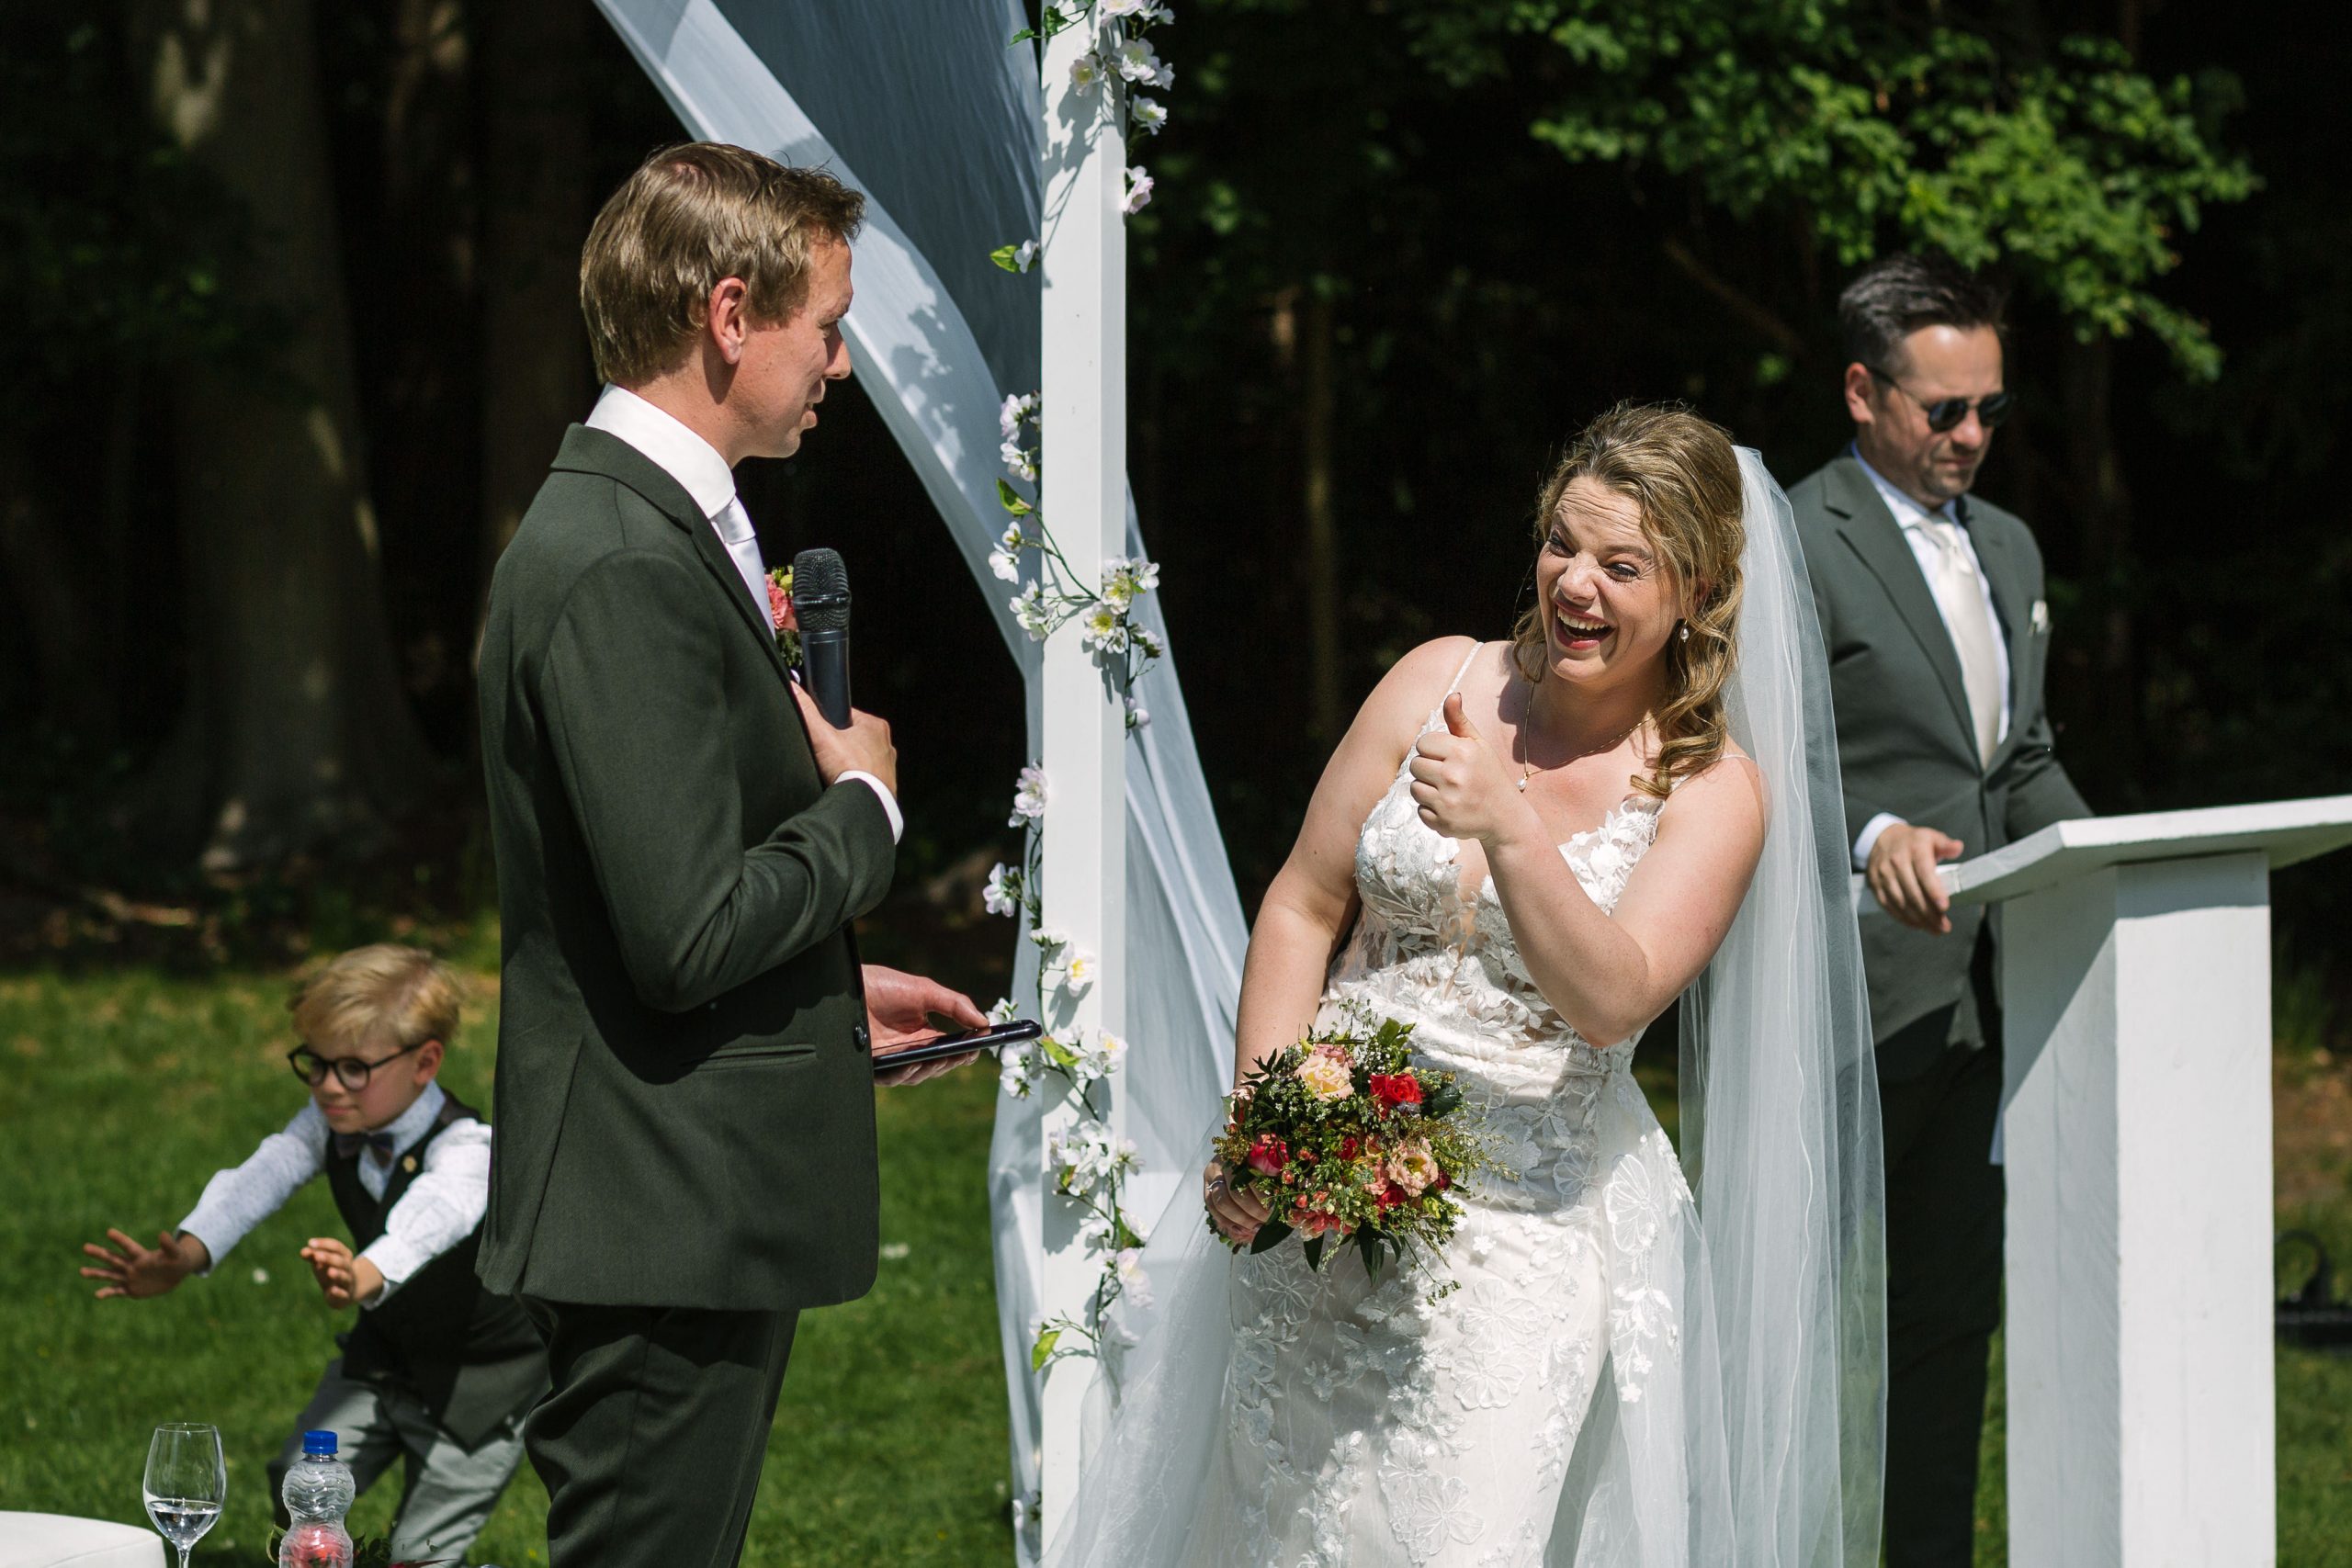 bride giving the thumbs up during the outdoor wedding ceremony natural unposed candid wedding photography by LGBTQ_friendly documentary wedding photographer surrey sussex